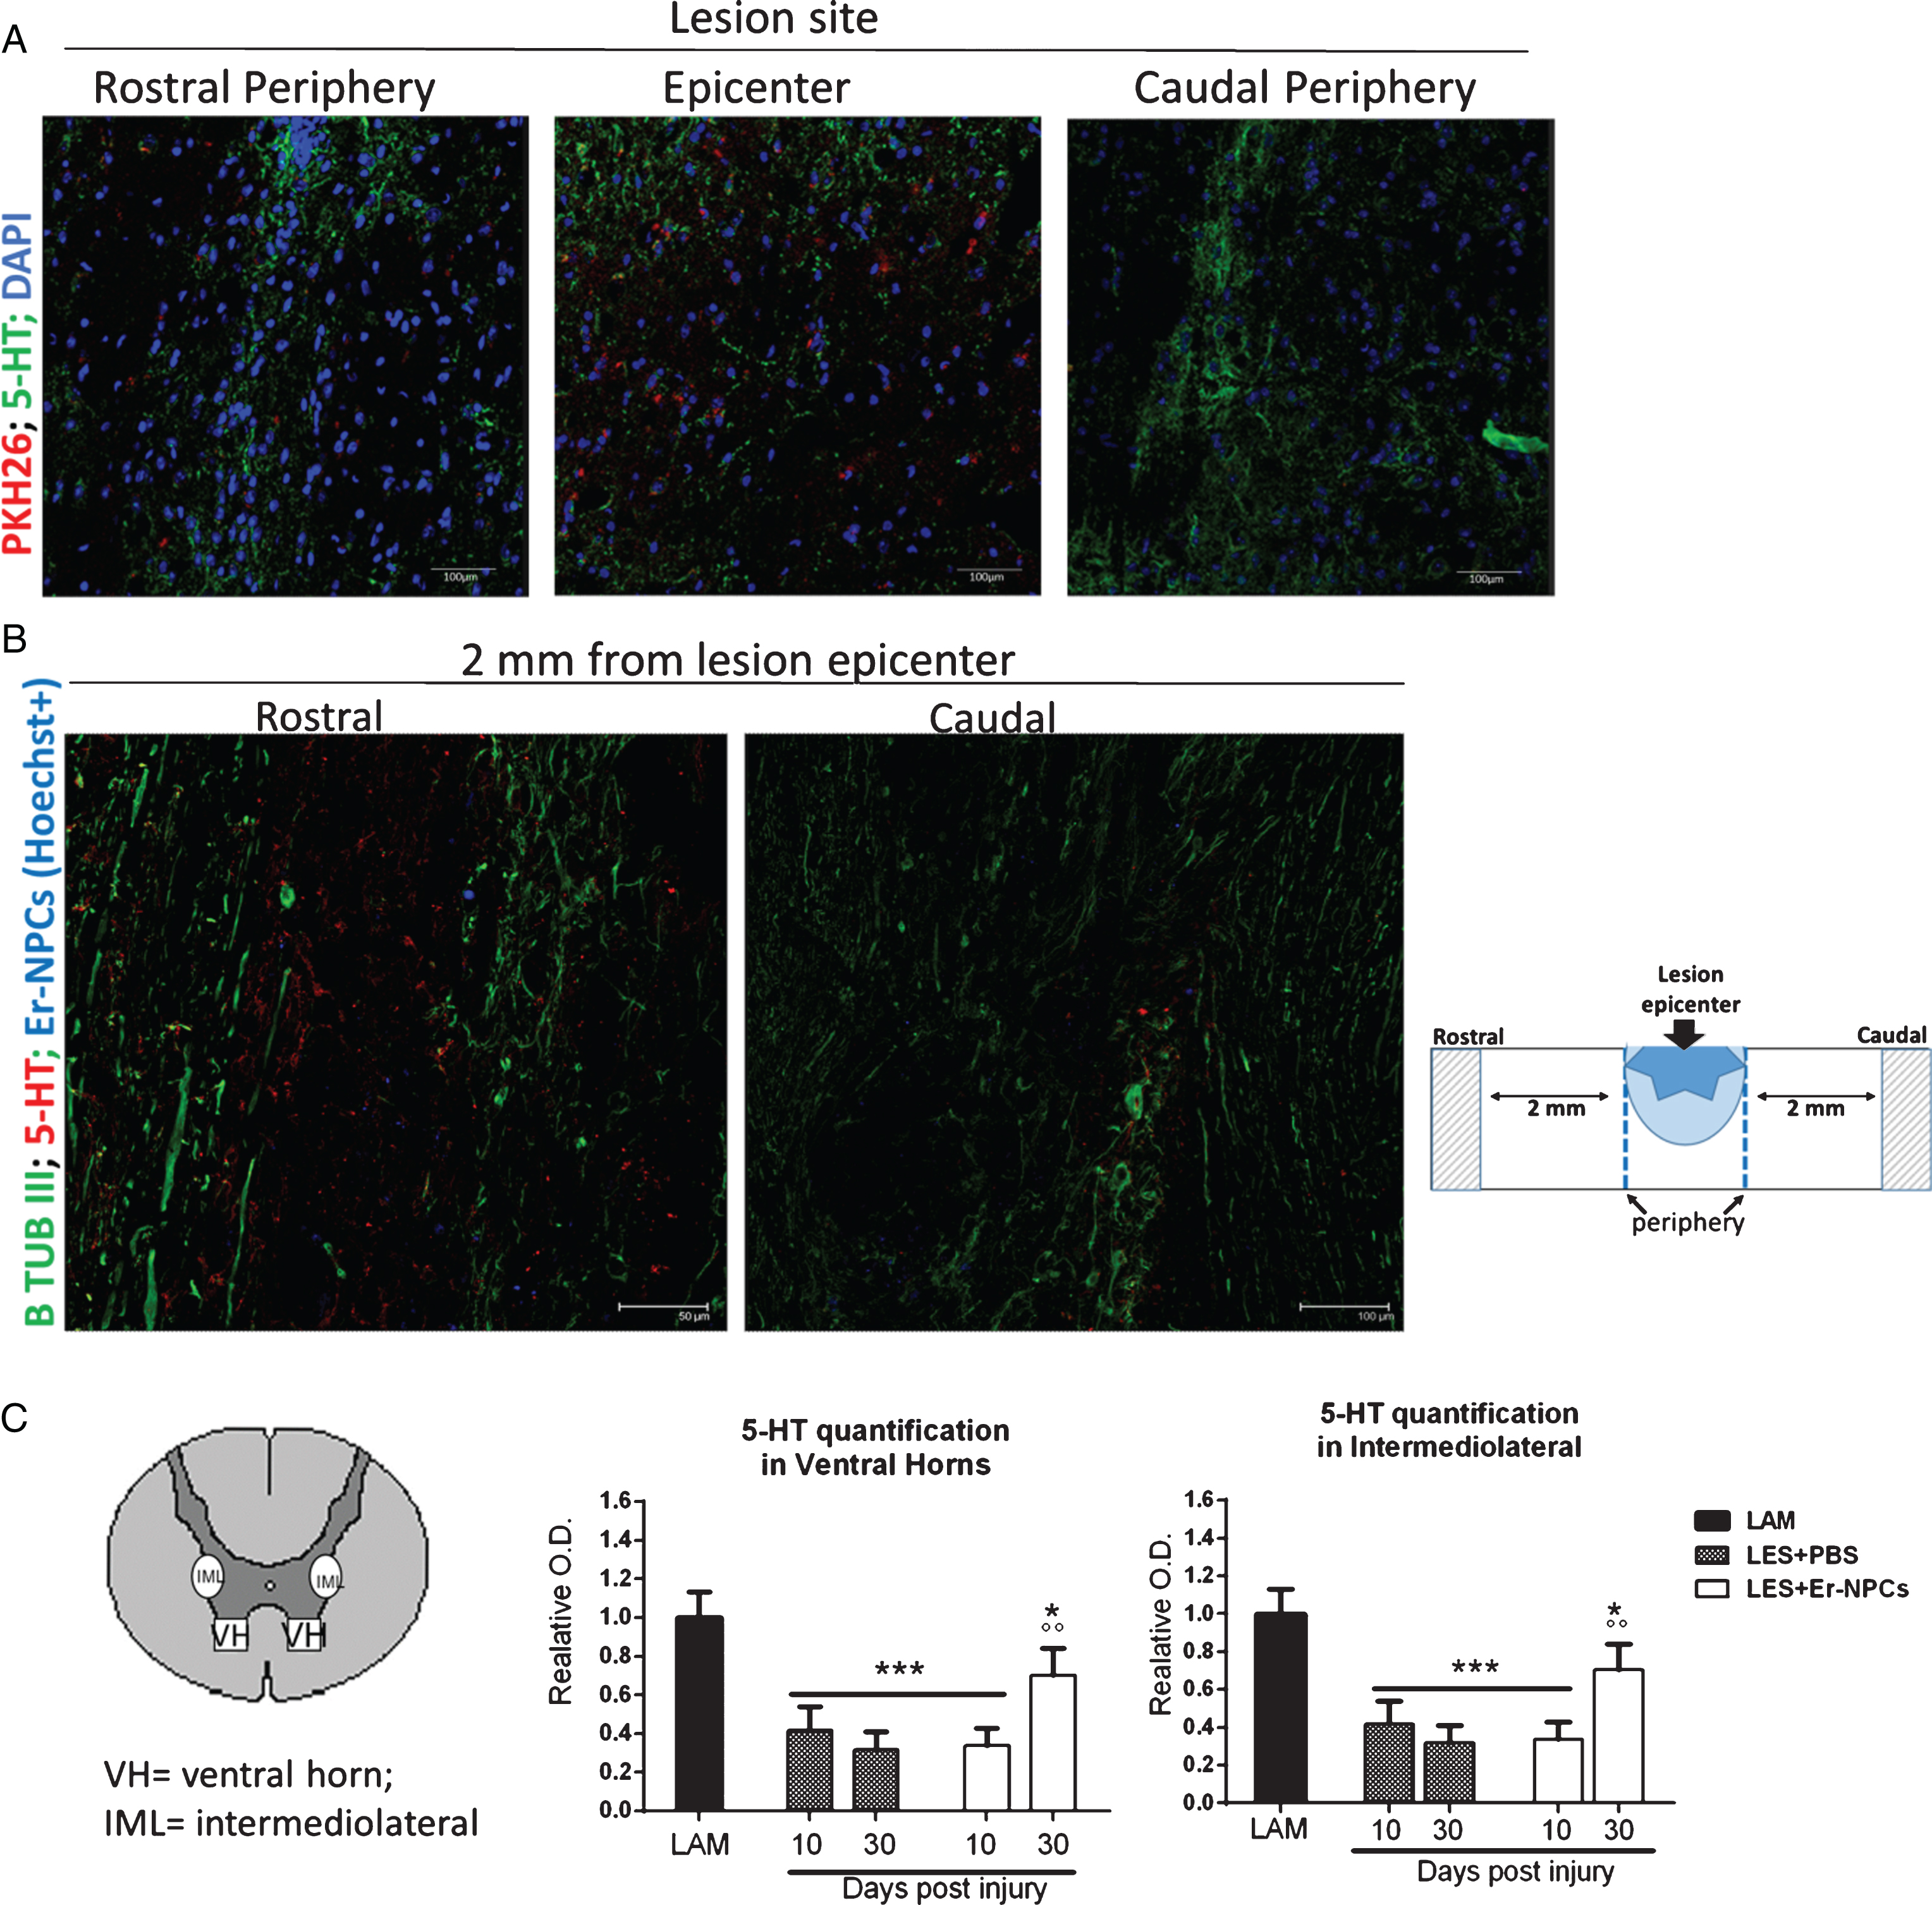 Er-NPCs promote serotoninergic fibres sprouting through the lesion site. Serotoninergic (5-HT) fibers were investigated at the lesion site (panel A) and 2 mm away from the lesion (panel B) 4 weeks after Er-NPCs infusion in lesioned mice. In panel A, Er-NPCs are shown in red (PKH26) and 5-HT is shown in green. Nuclei were counterstained with DAPI (blue). In panel B, 5-HT staining is showed in red and neuronal fibers were identified with beta-tubulin III (green). Er-NPCs were labelled with Hoechst 33342 before the infusion (blue). Scale bars = 50 and 100 μm. Quantification was performed 2 mm caudally to the lesion epicenter at 10 and 30 days after Er-NPCs transplantation in lesioned animals (panel C). The quantification was performed in spinal cord coronal sections (n = 3 for each animal; at least 6 animal per group) as described in detail in M&M in intermediolateral and ventral horns (please see the representation). Values represent average±SD. We determined the statistical differences by means of an ANOVA test followed by Bonferroni’s post-test. ***p < 0.001 vs LAM; °p < 0.05 vs LES+PBS.